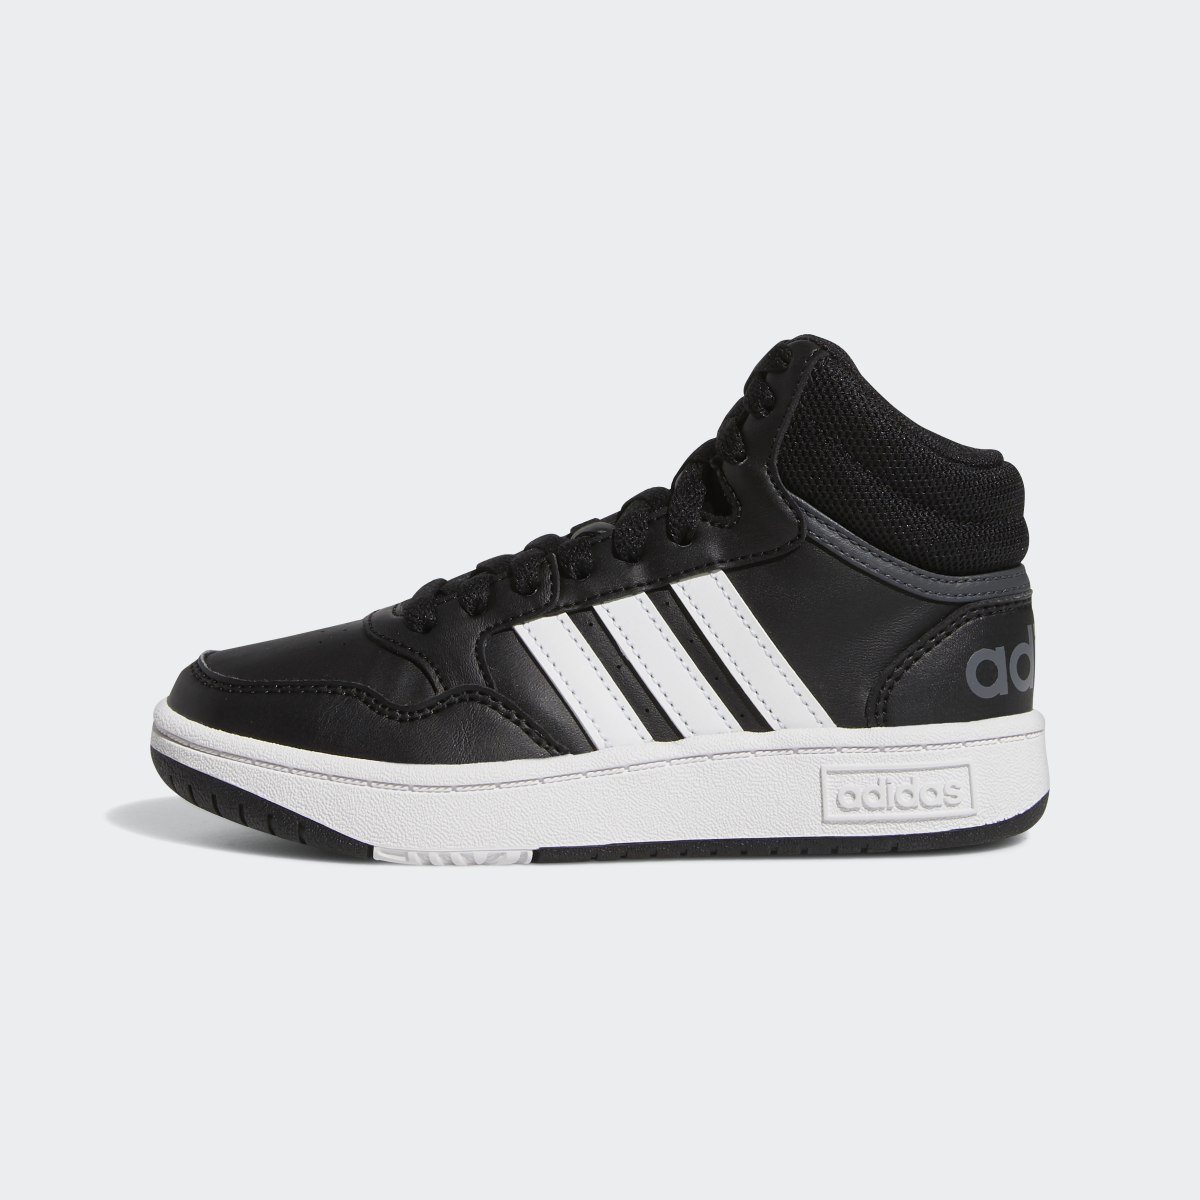 Adidas Chaussure Hoops Mid. 7